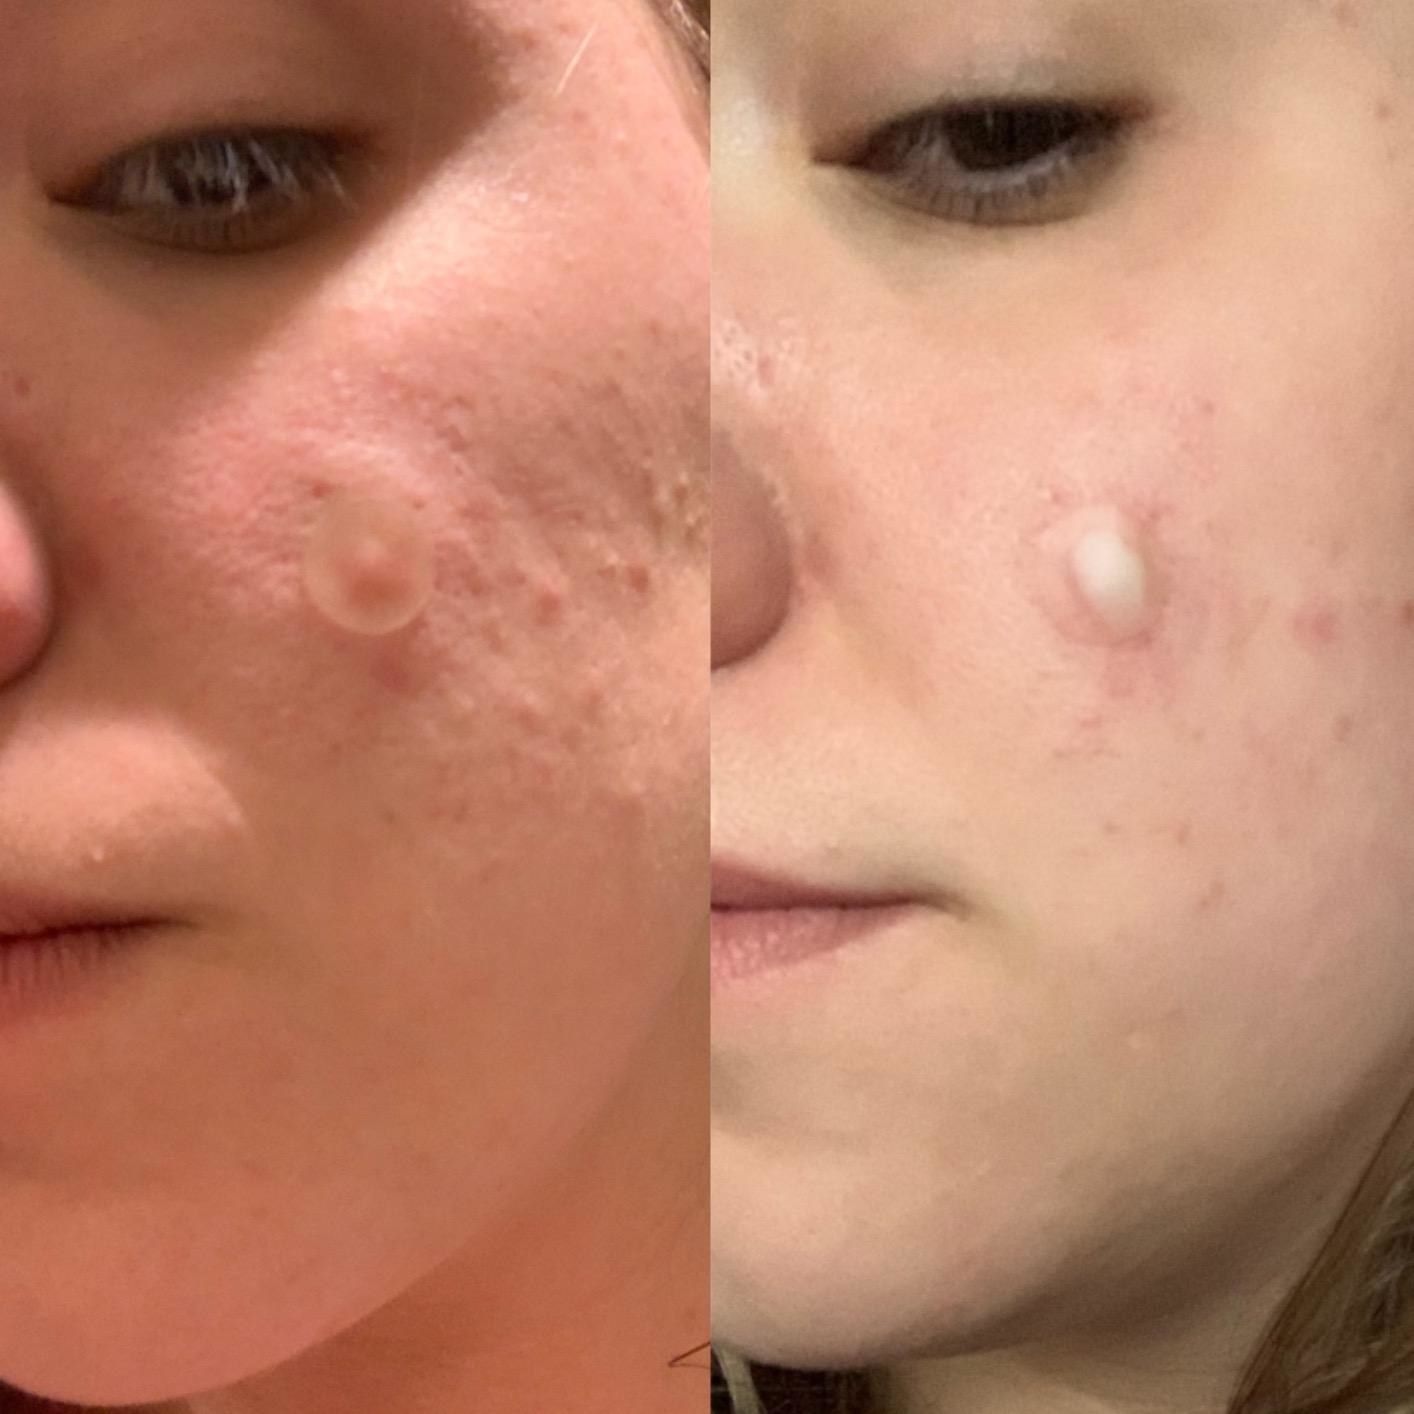 A reviewer with a patch on their zit, and their &quot;after&quot; photo showing the patch has absorbed a bunch of white gunk